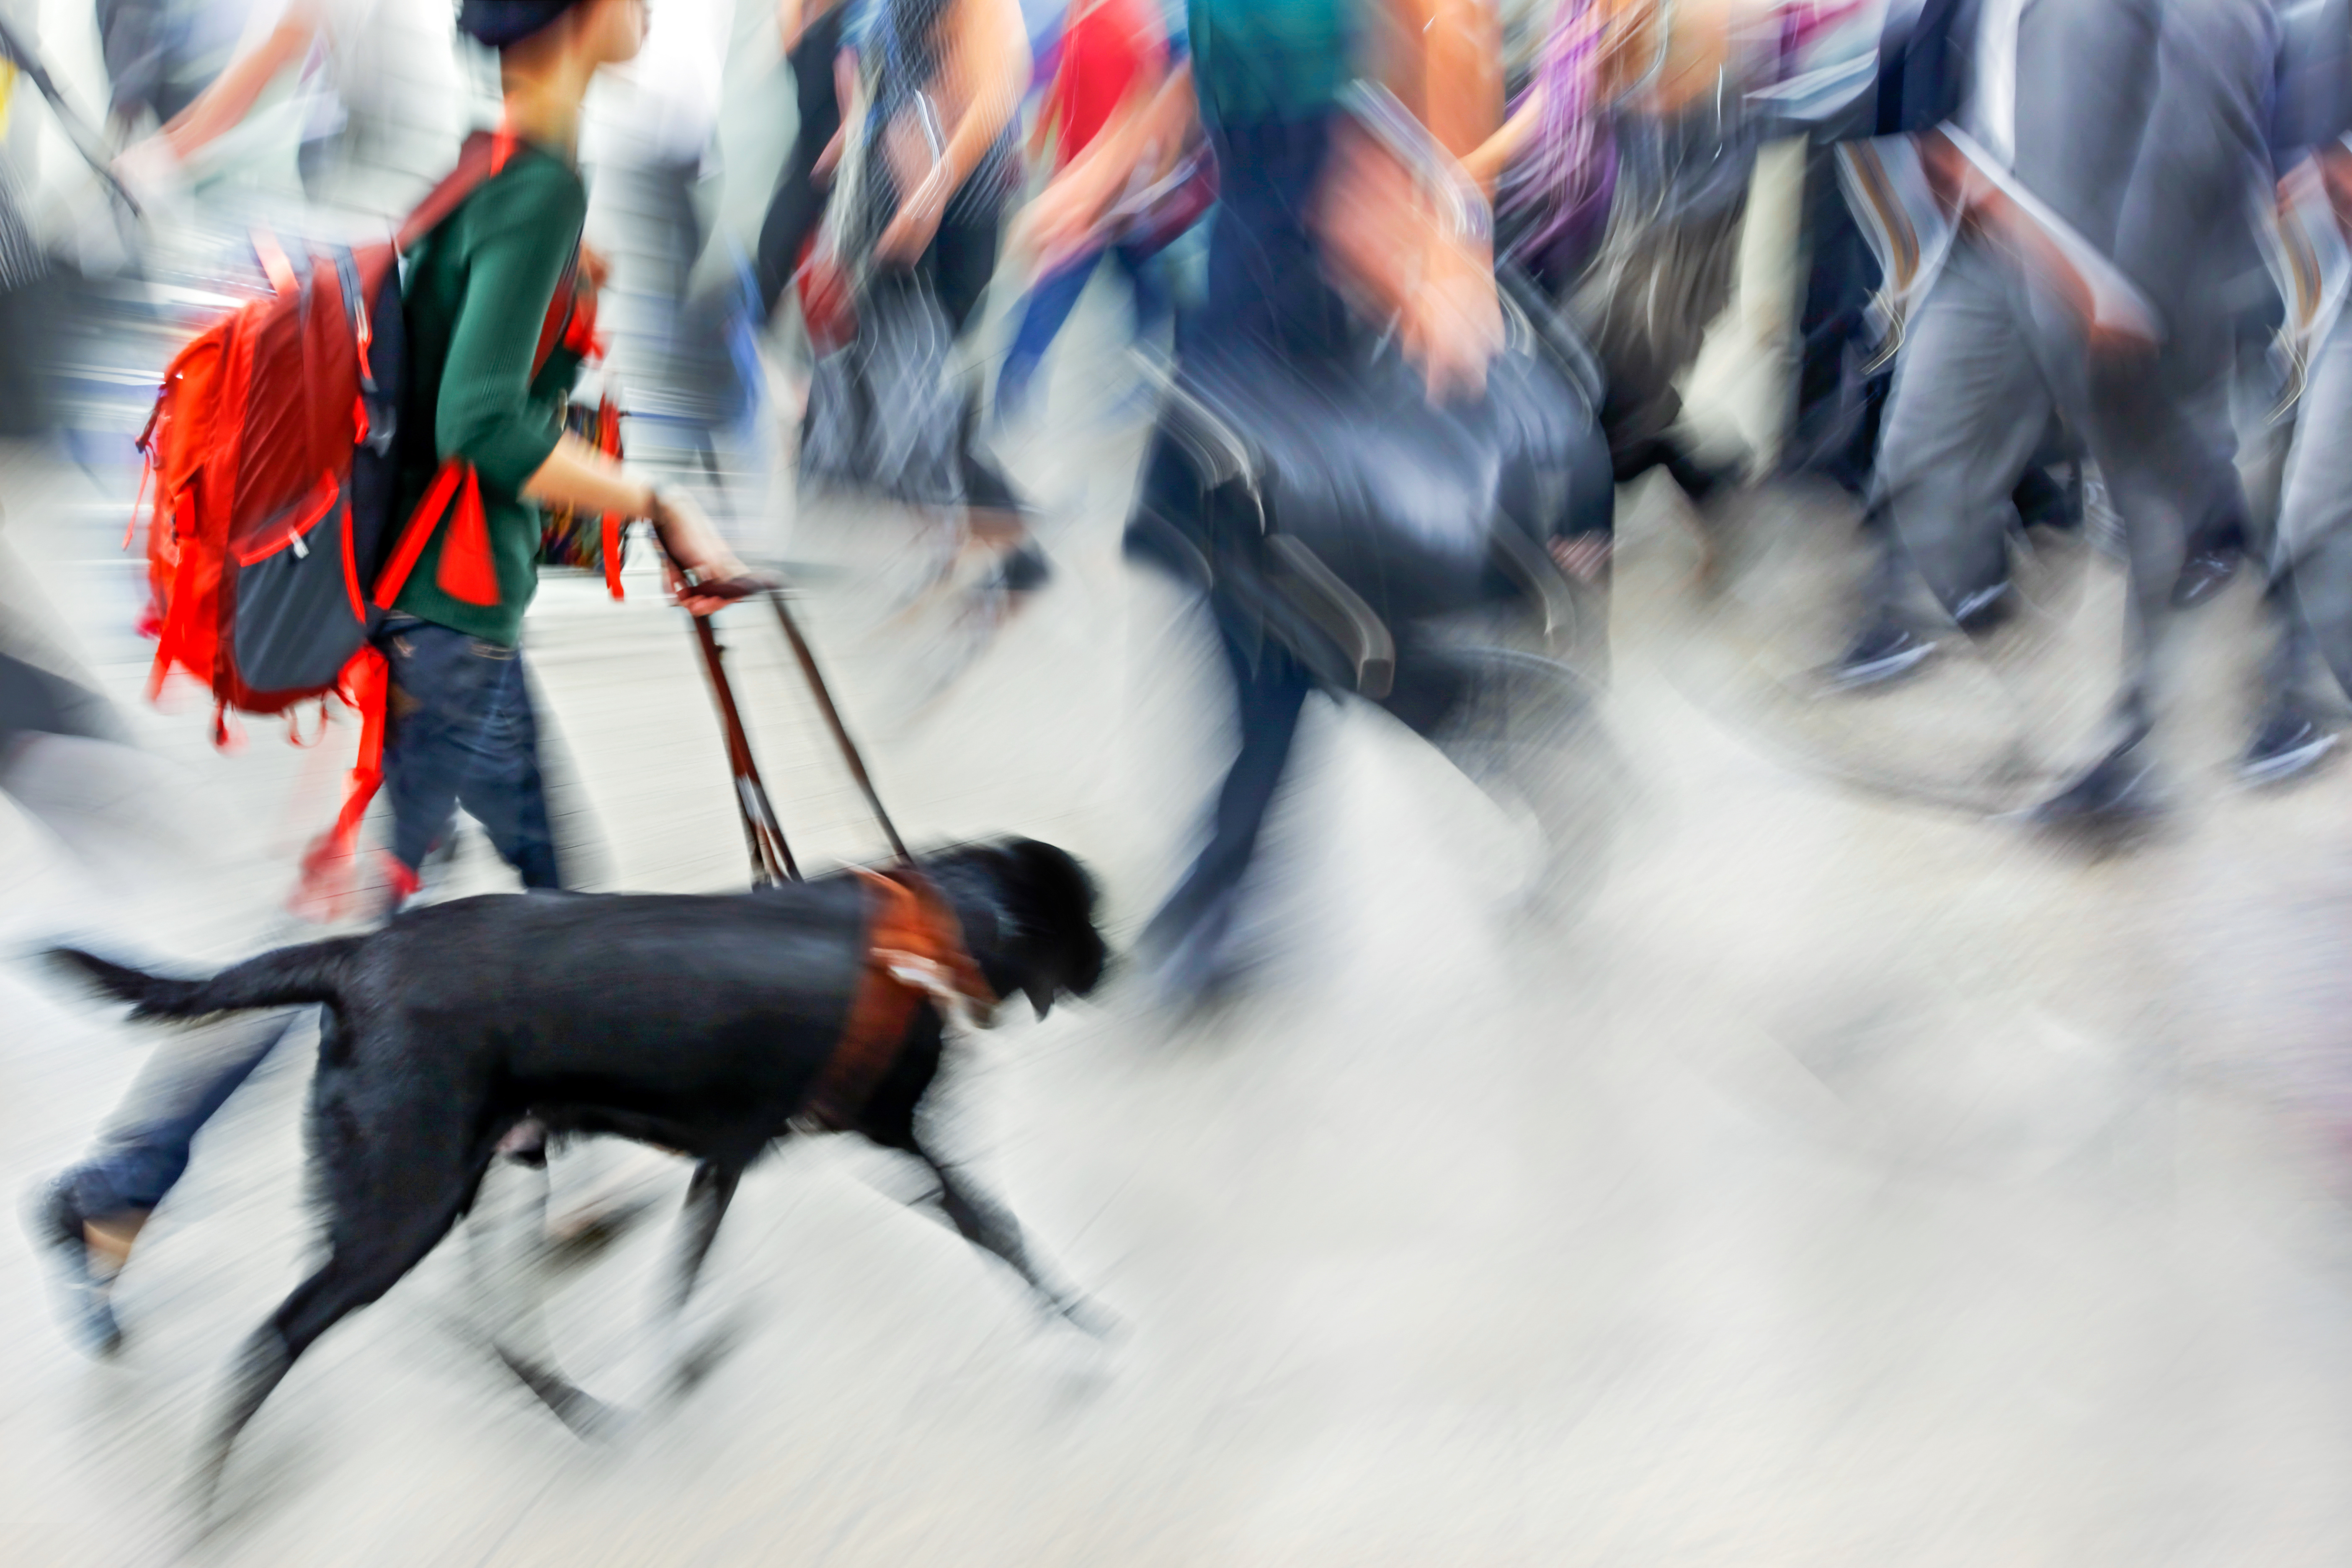 Guide dog is helping bilnd people in motion blur